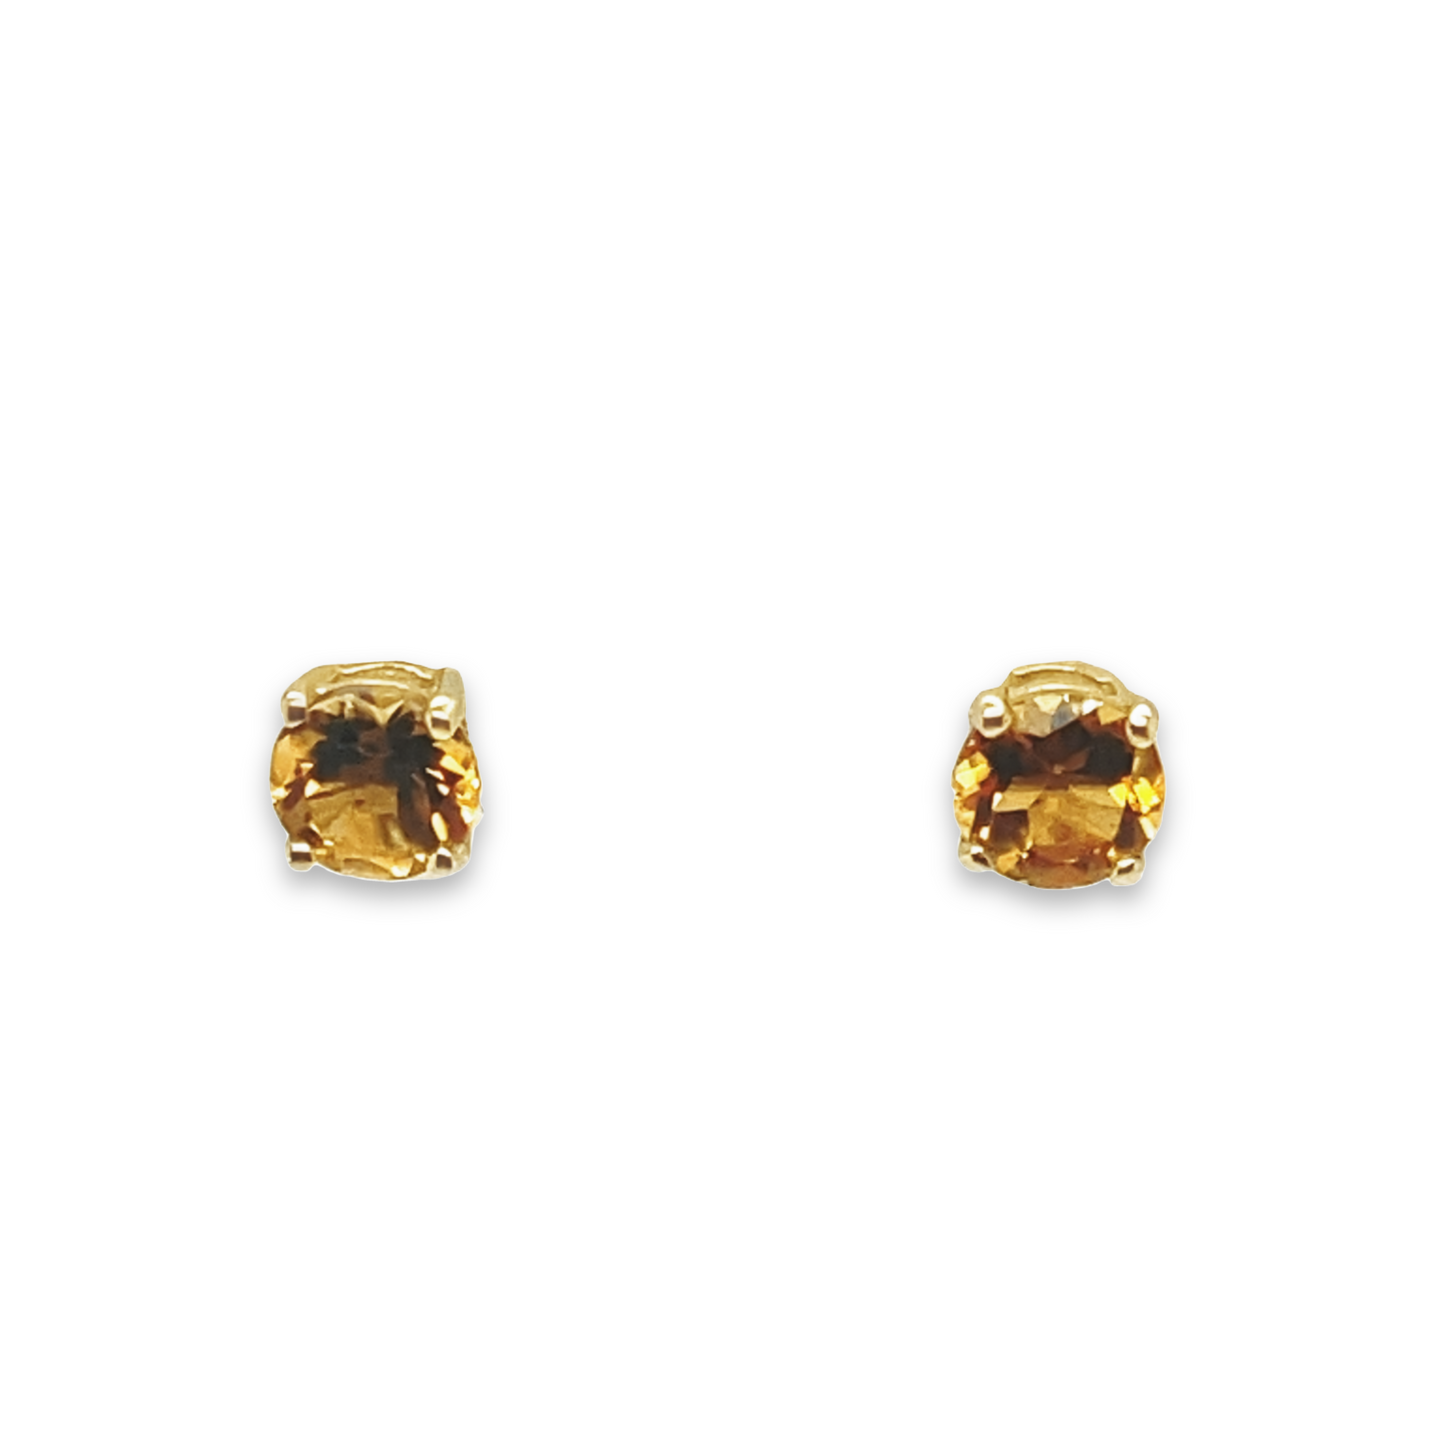 9ct Yellow Gold Round Cut Citrine Stud Earrings